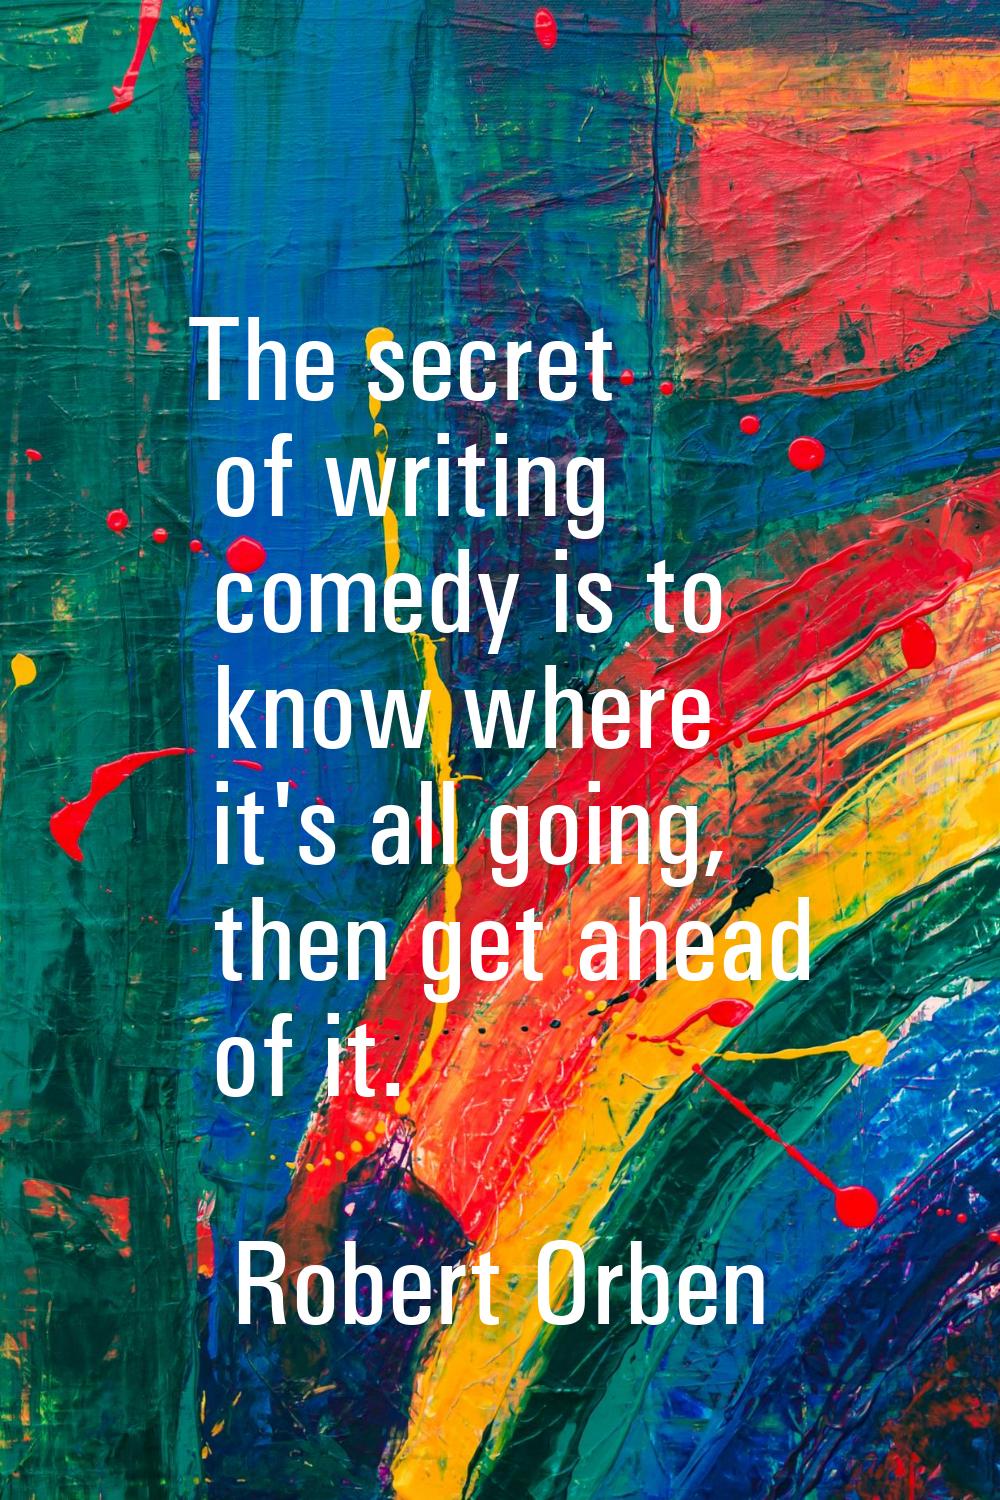 The secret of writing comedy is to know where it's all going, then get ahead of it.